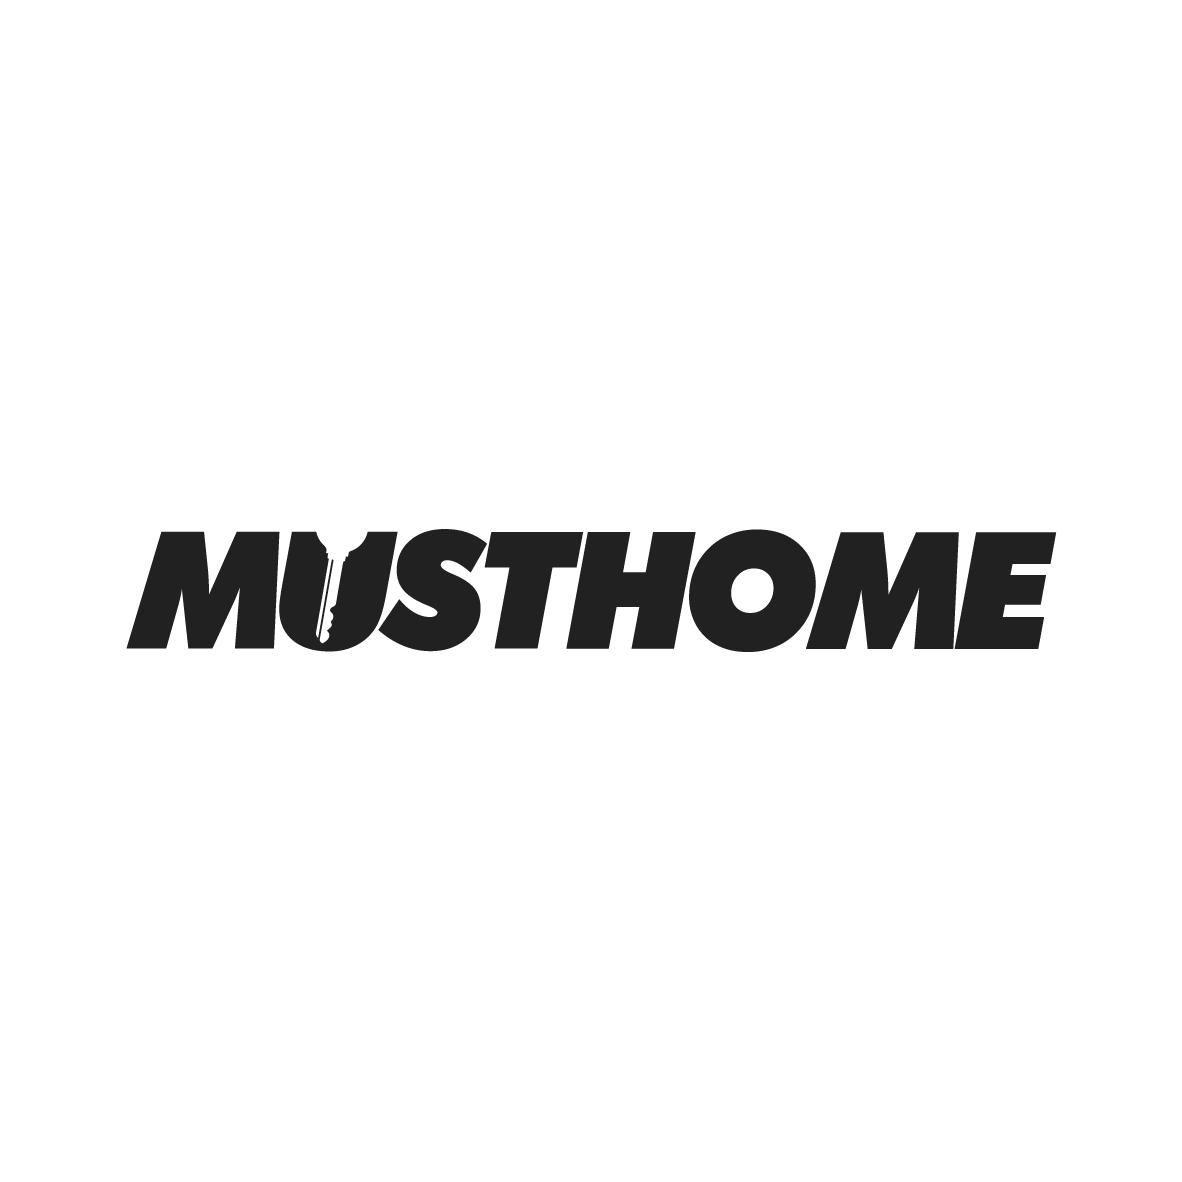 MUSTHOME